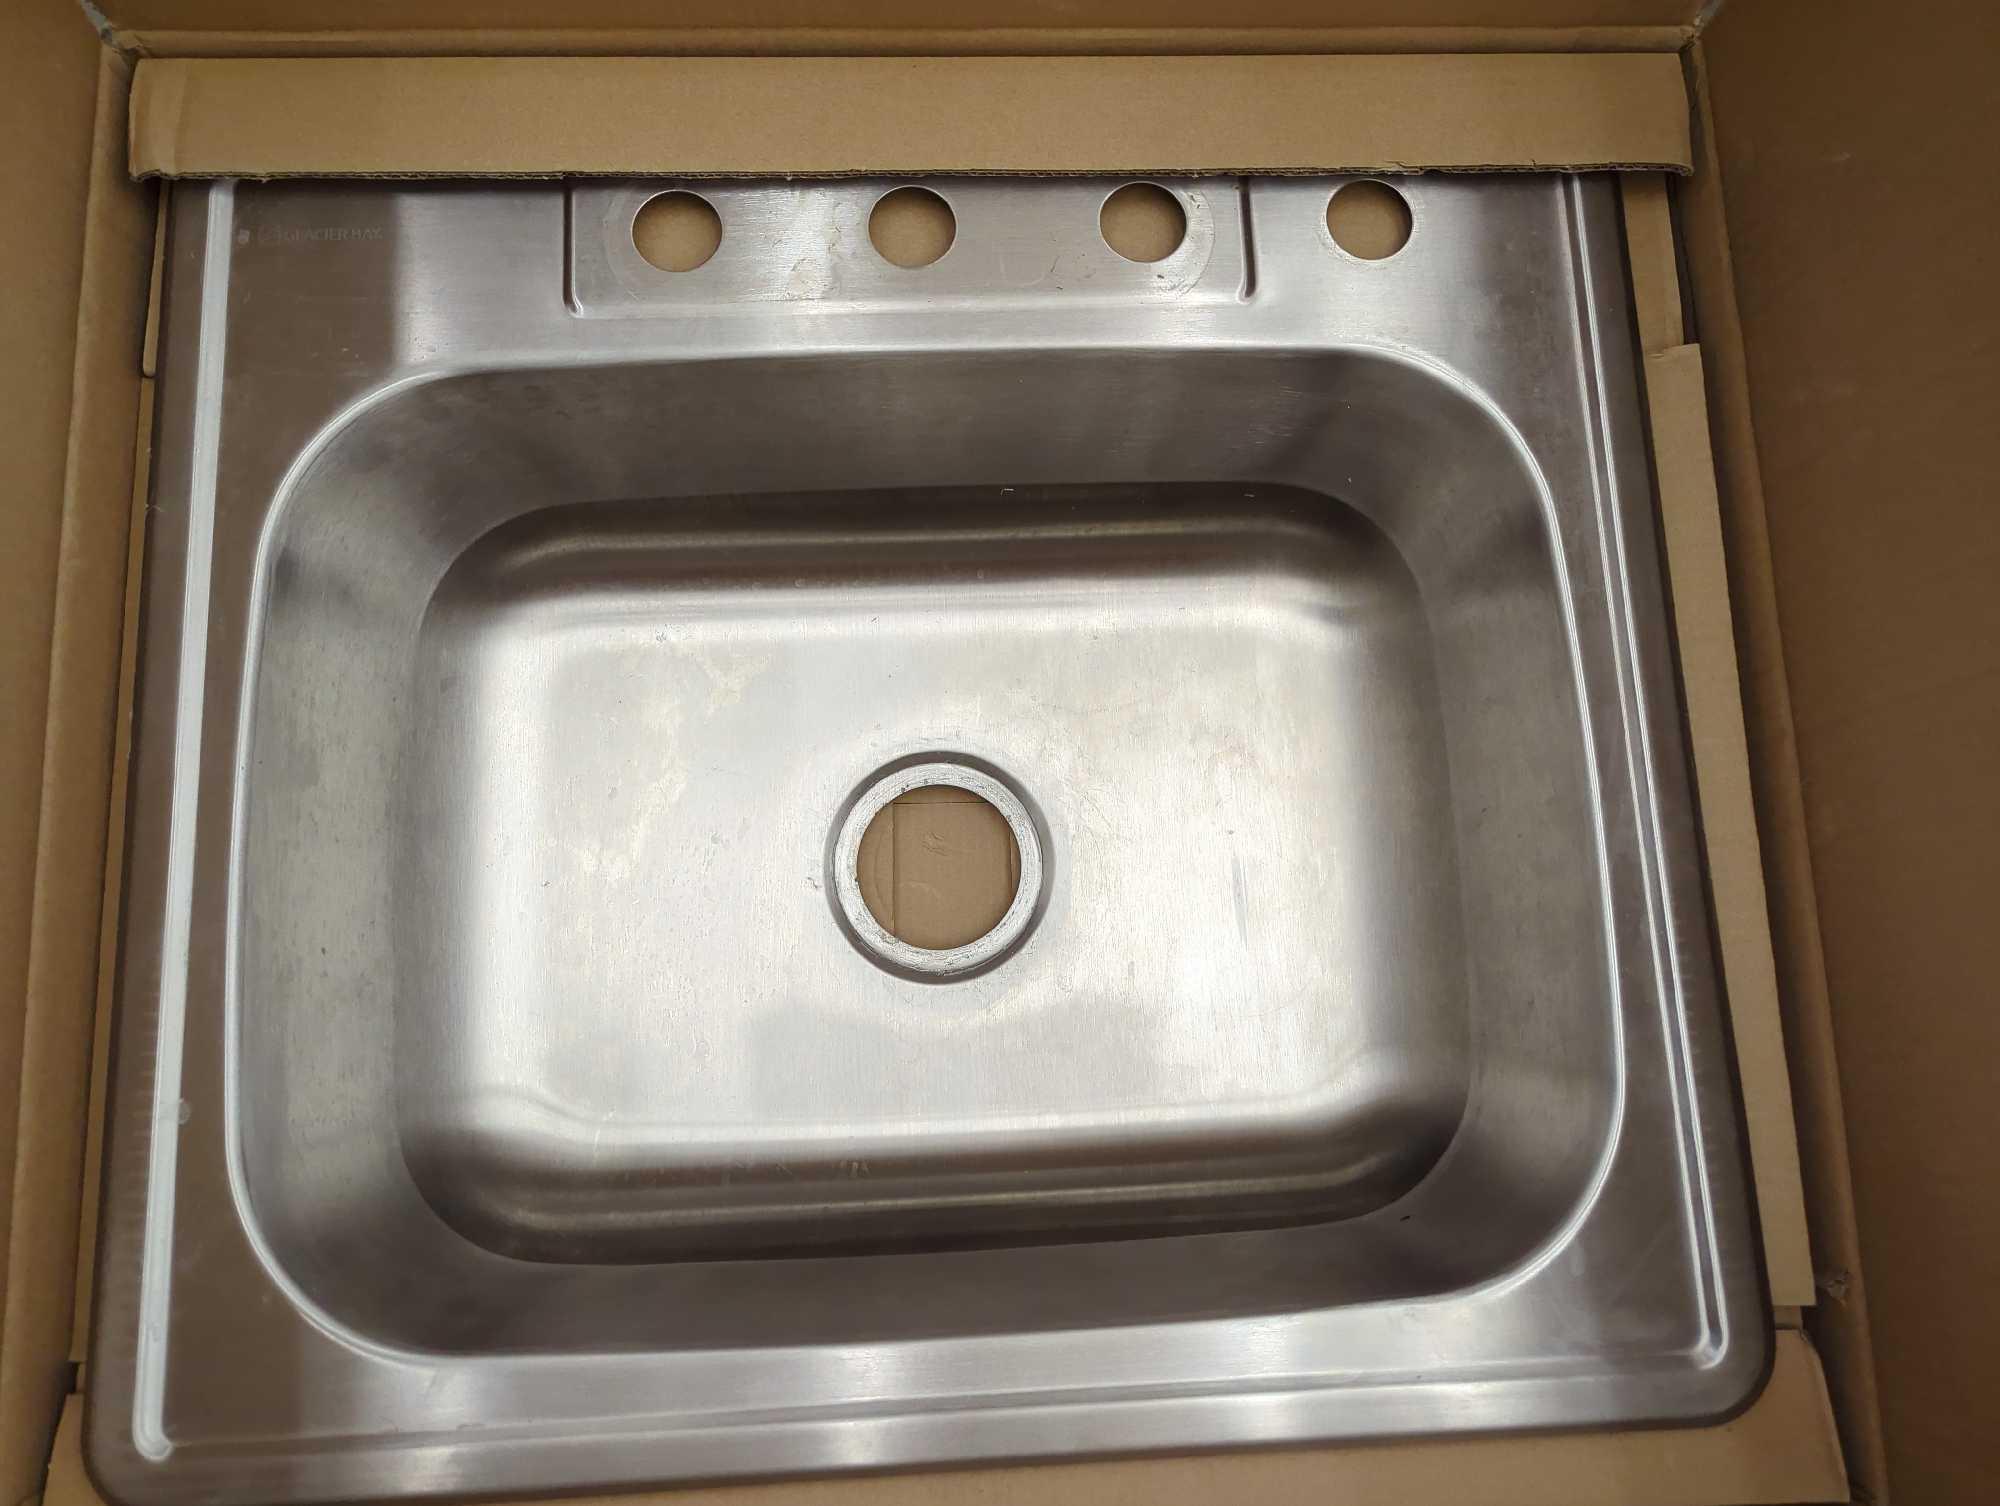 Glacier Bay 25 in. Drop in Single Bowl 20-Gauge Stainless Steel Kitchen Sink, Appears to be Used in